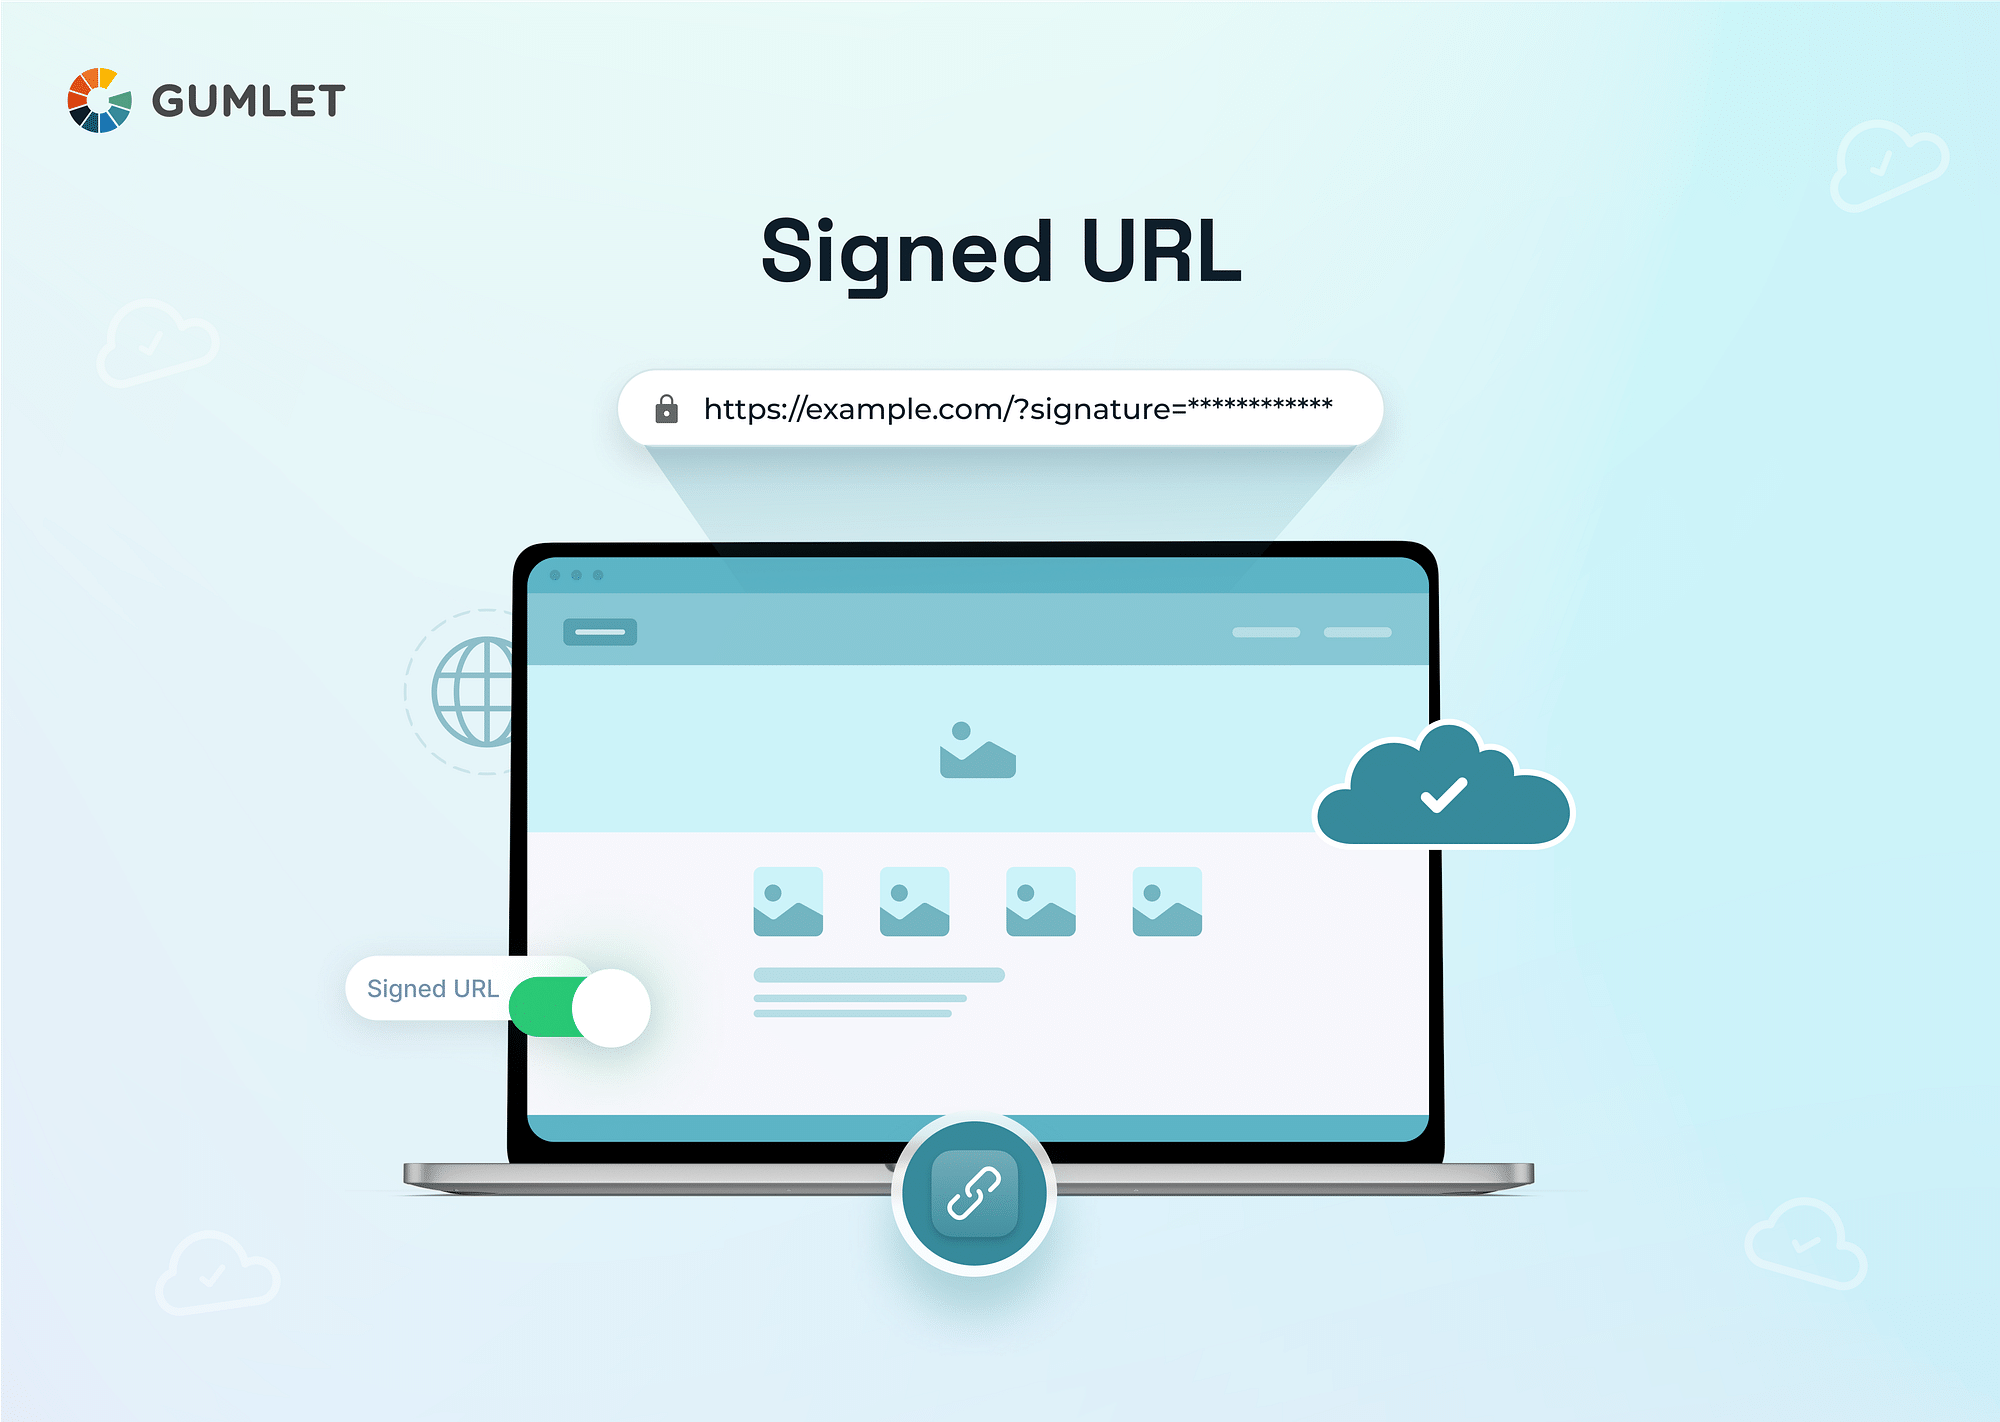 How to protect video content using Signed URLs?